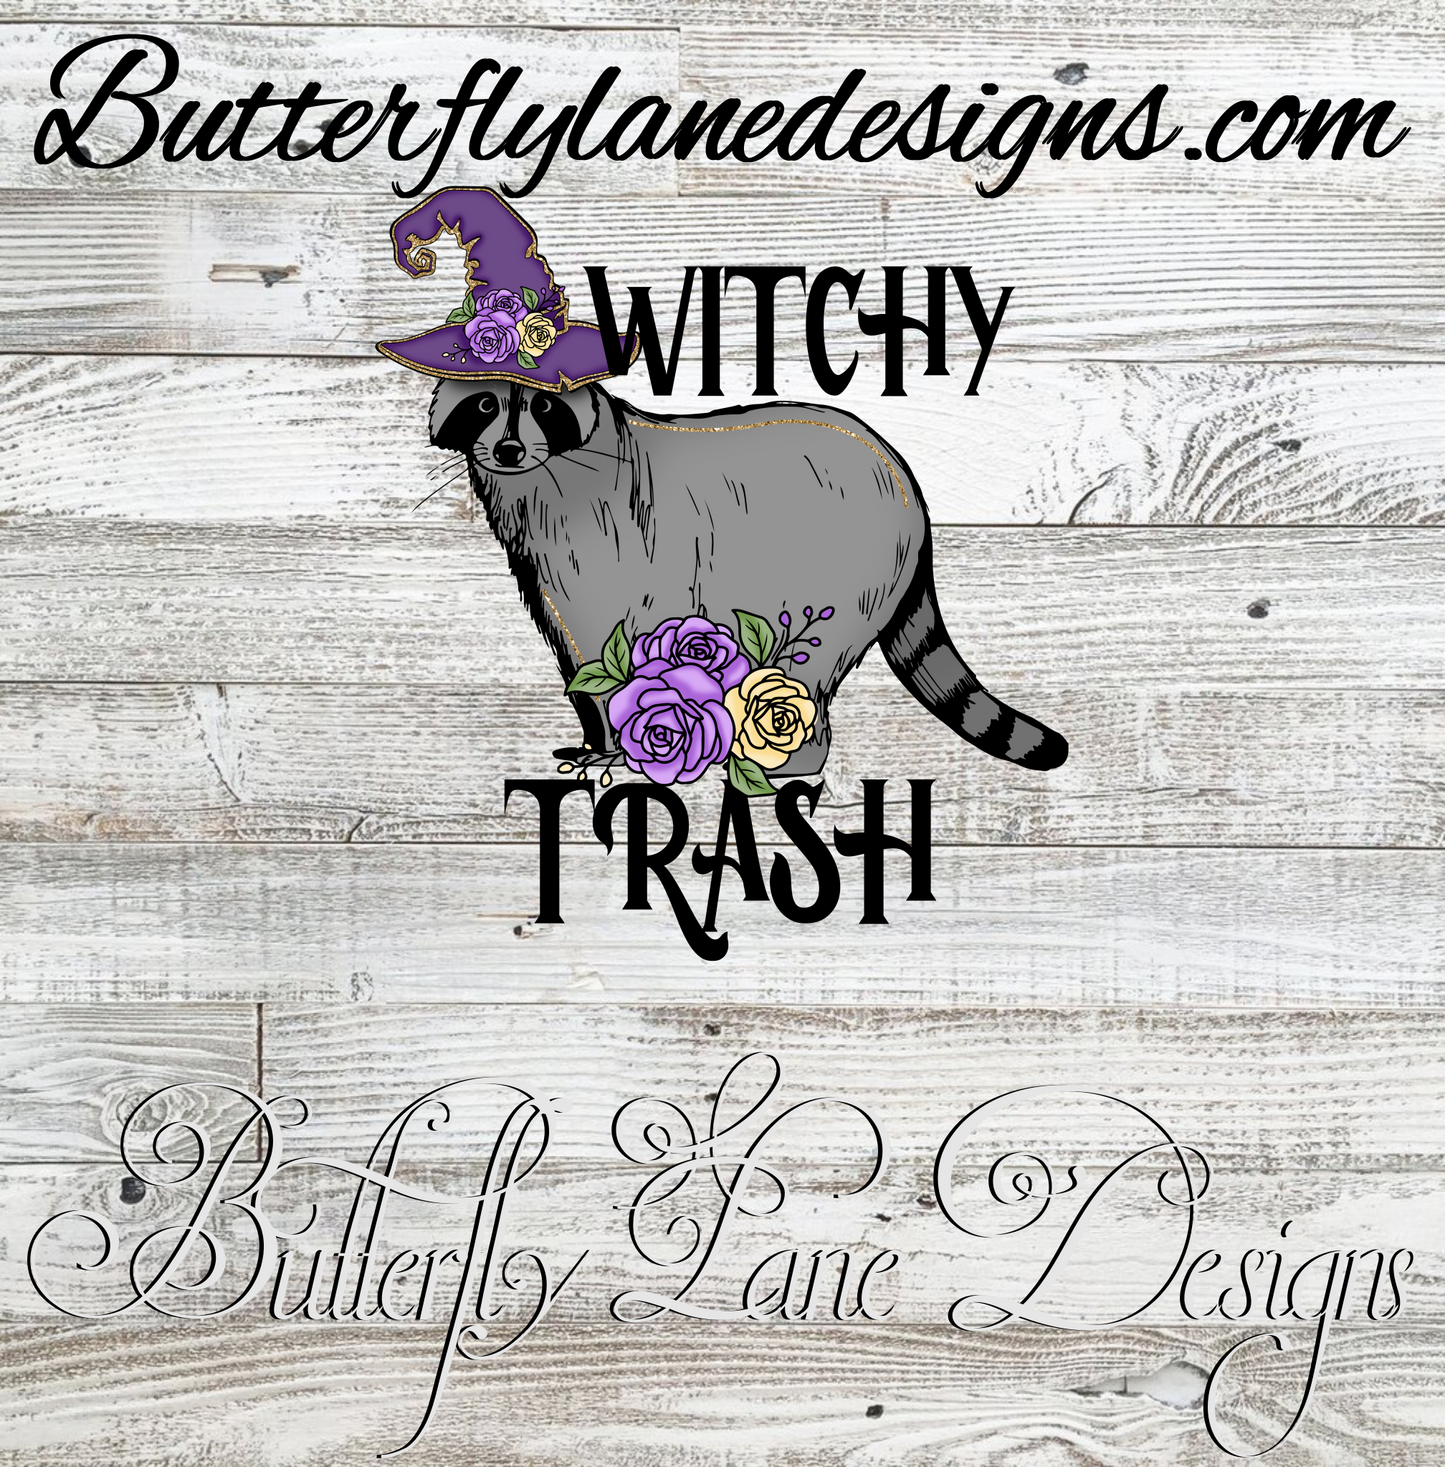 Witchy trash panda :: Clear Decal :: VC Decal